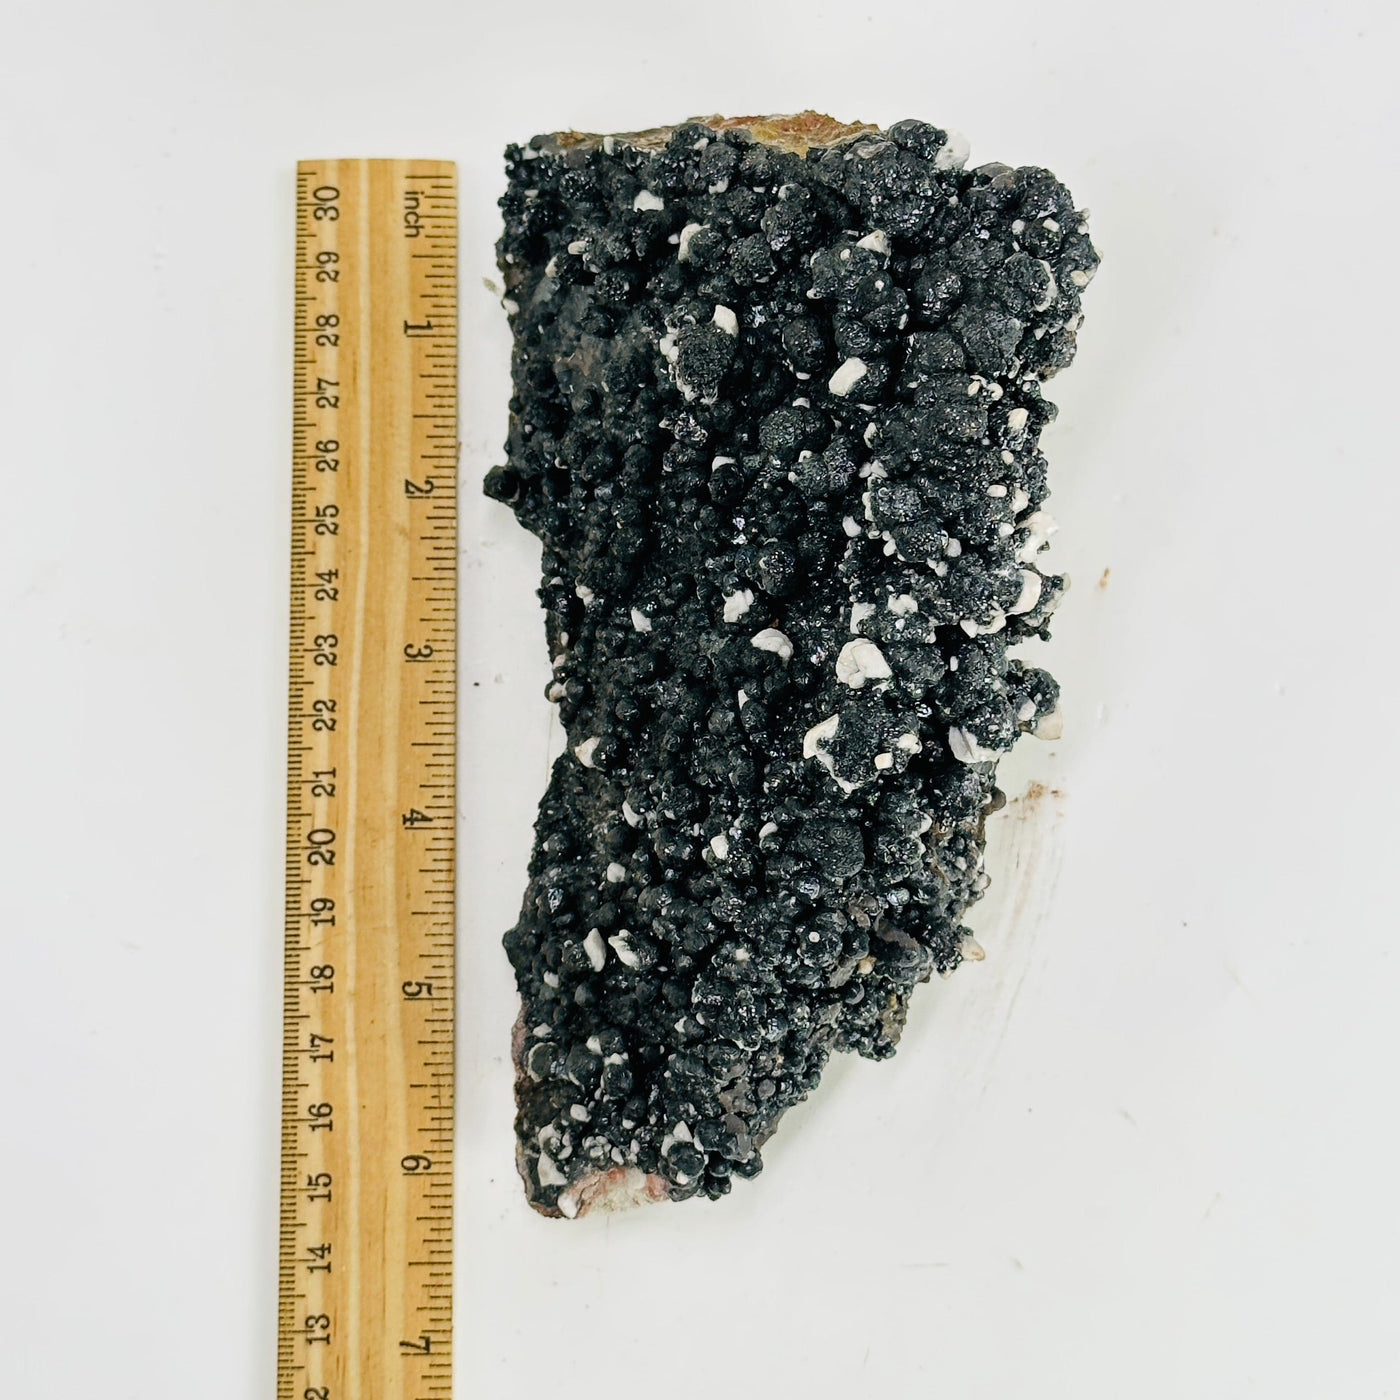 goethite calcite cluster next to a ruler for size reference